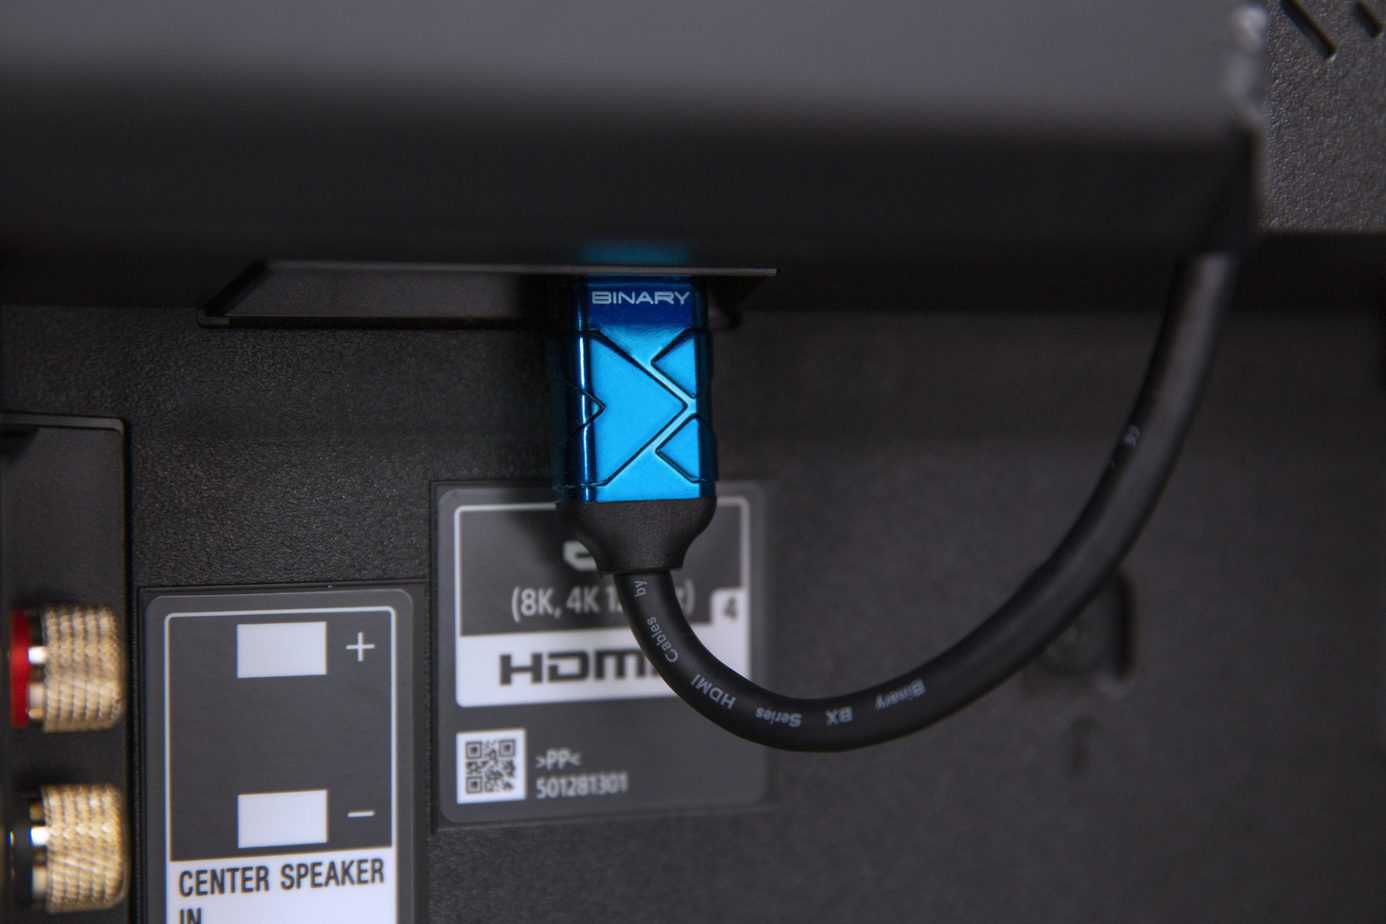 HDMI Cables for custom installers